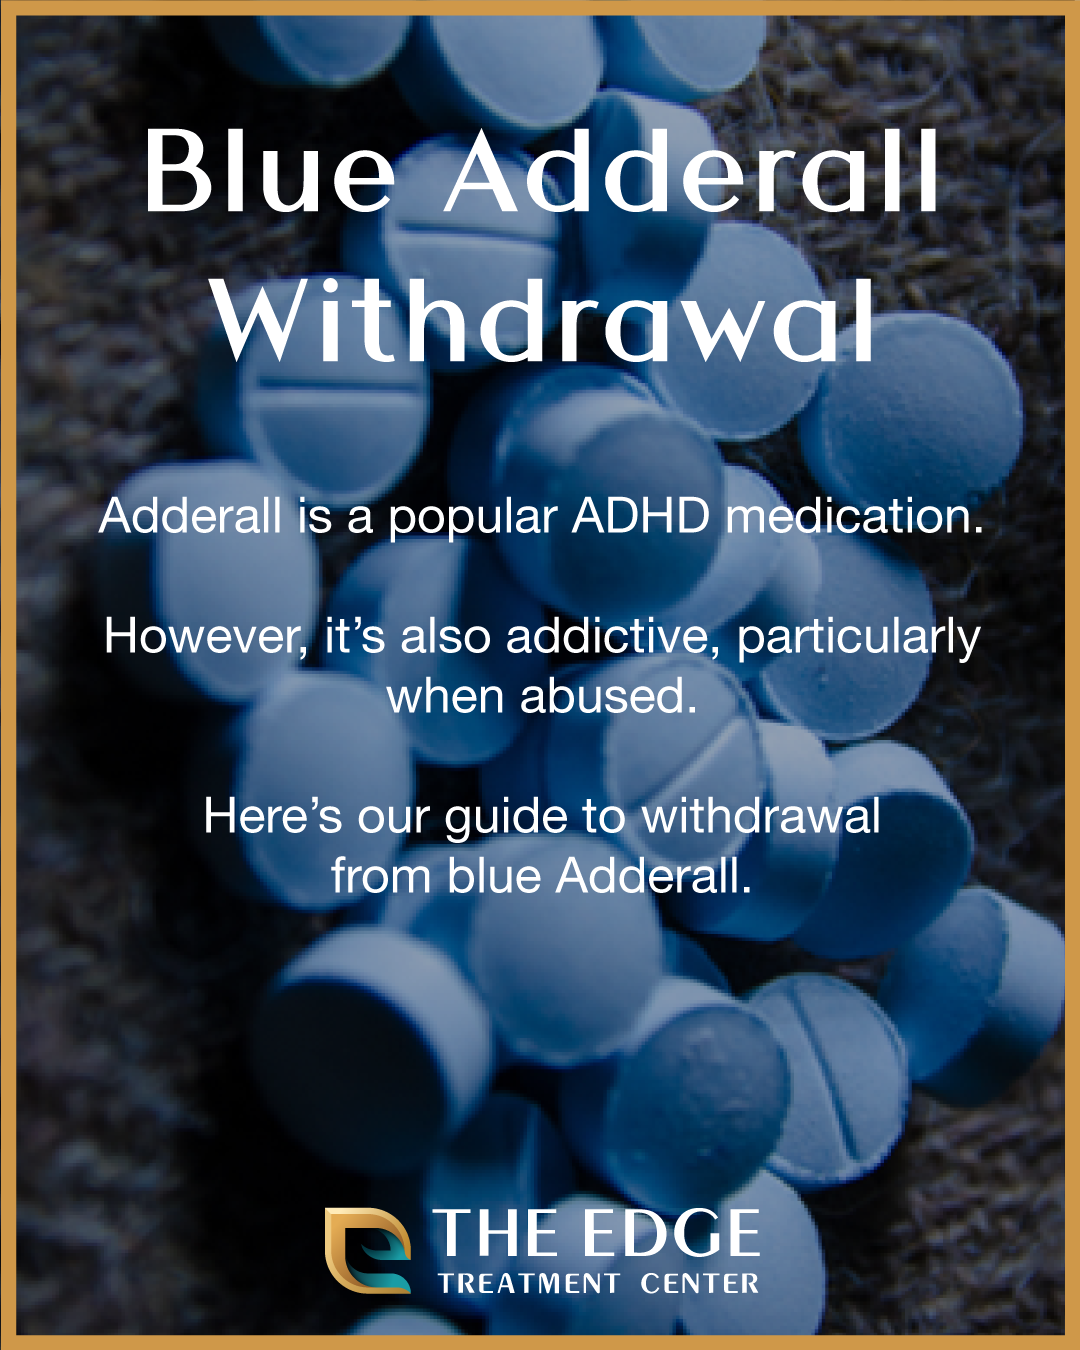 Modafinil Vs Adderall: Which Is Better?